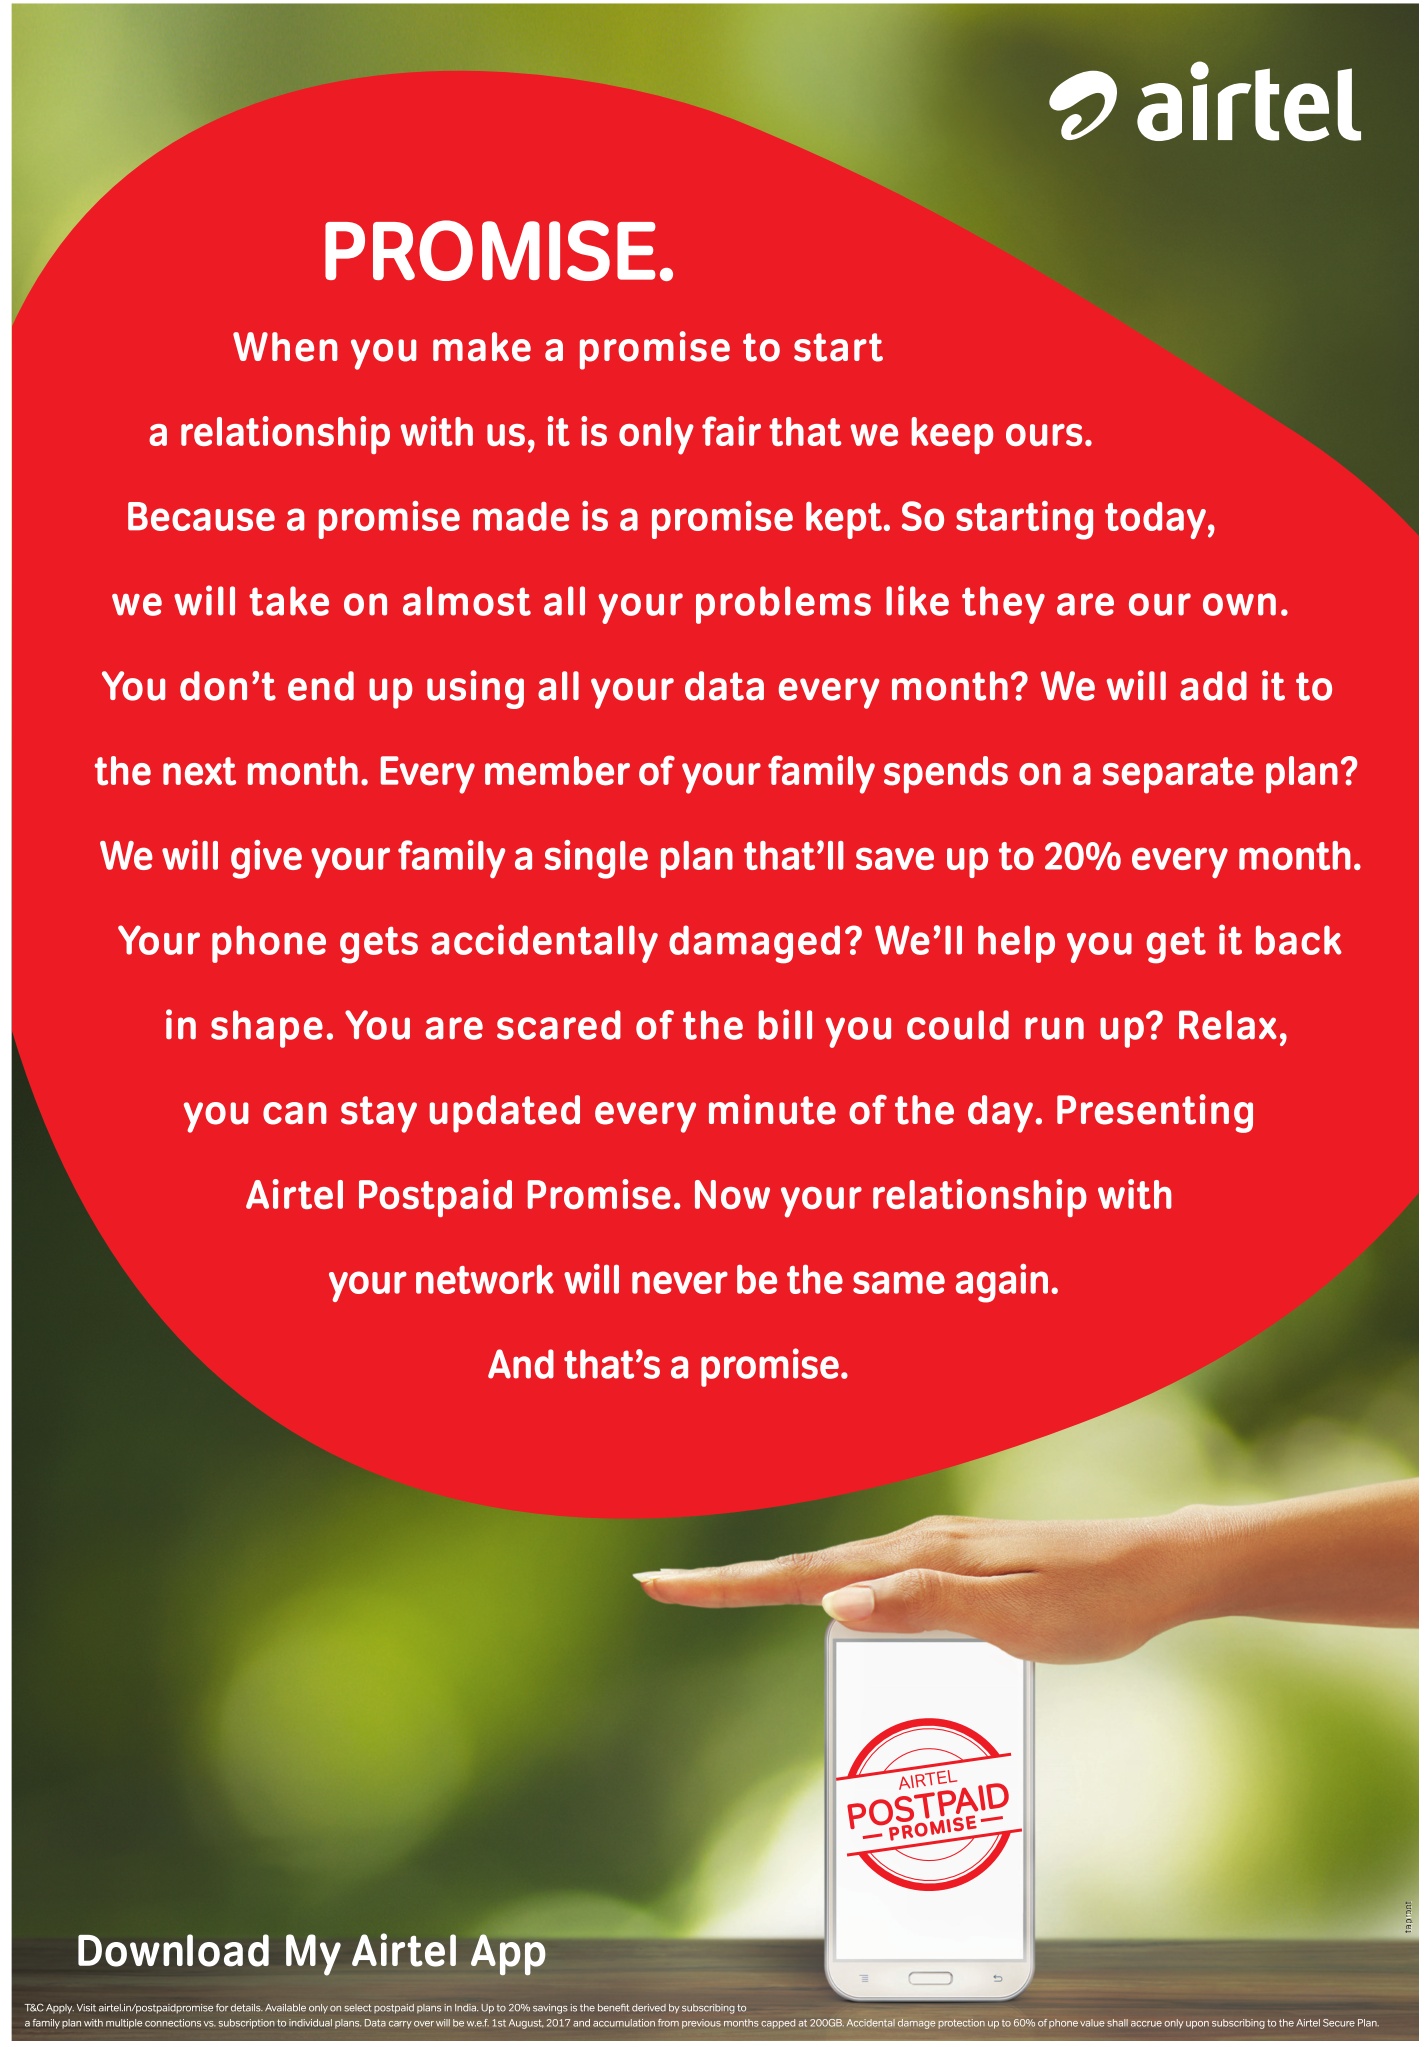 my-airtel-app-ad-times-of-india-bangalore-12-07-2017